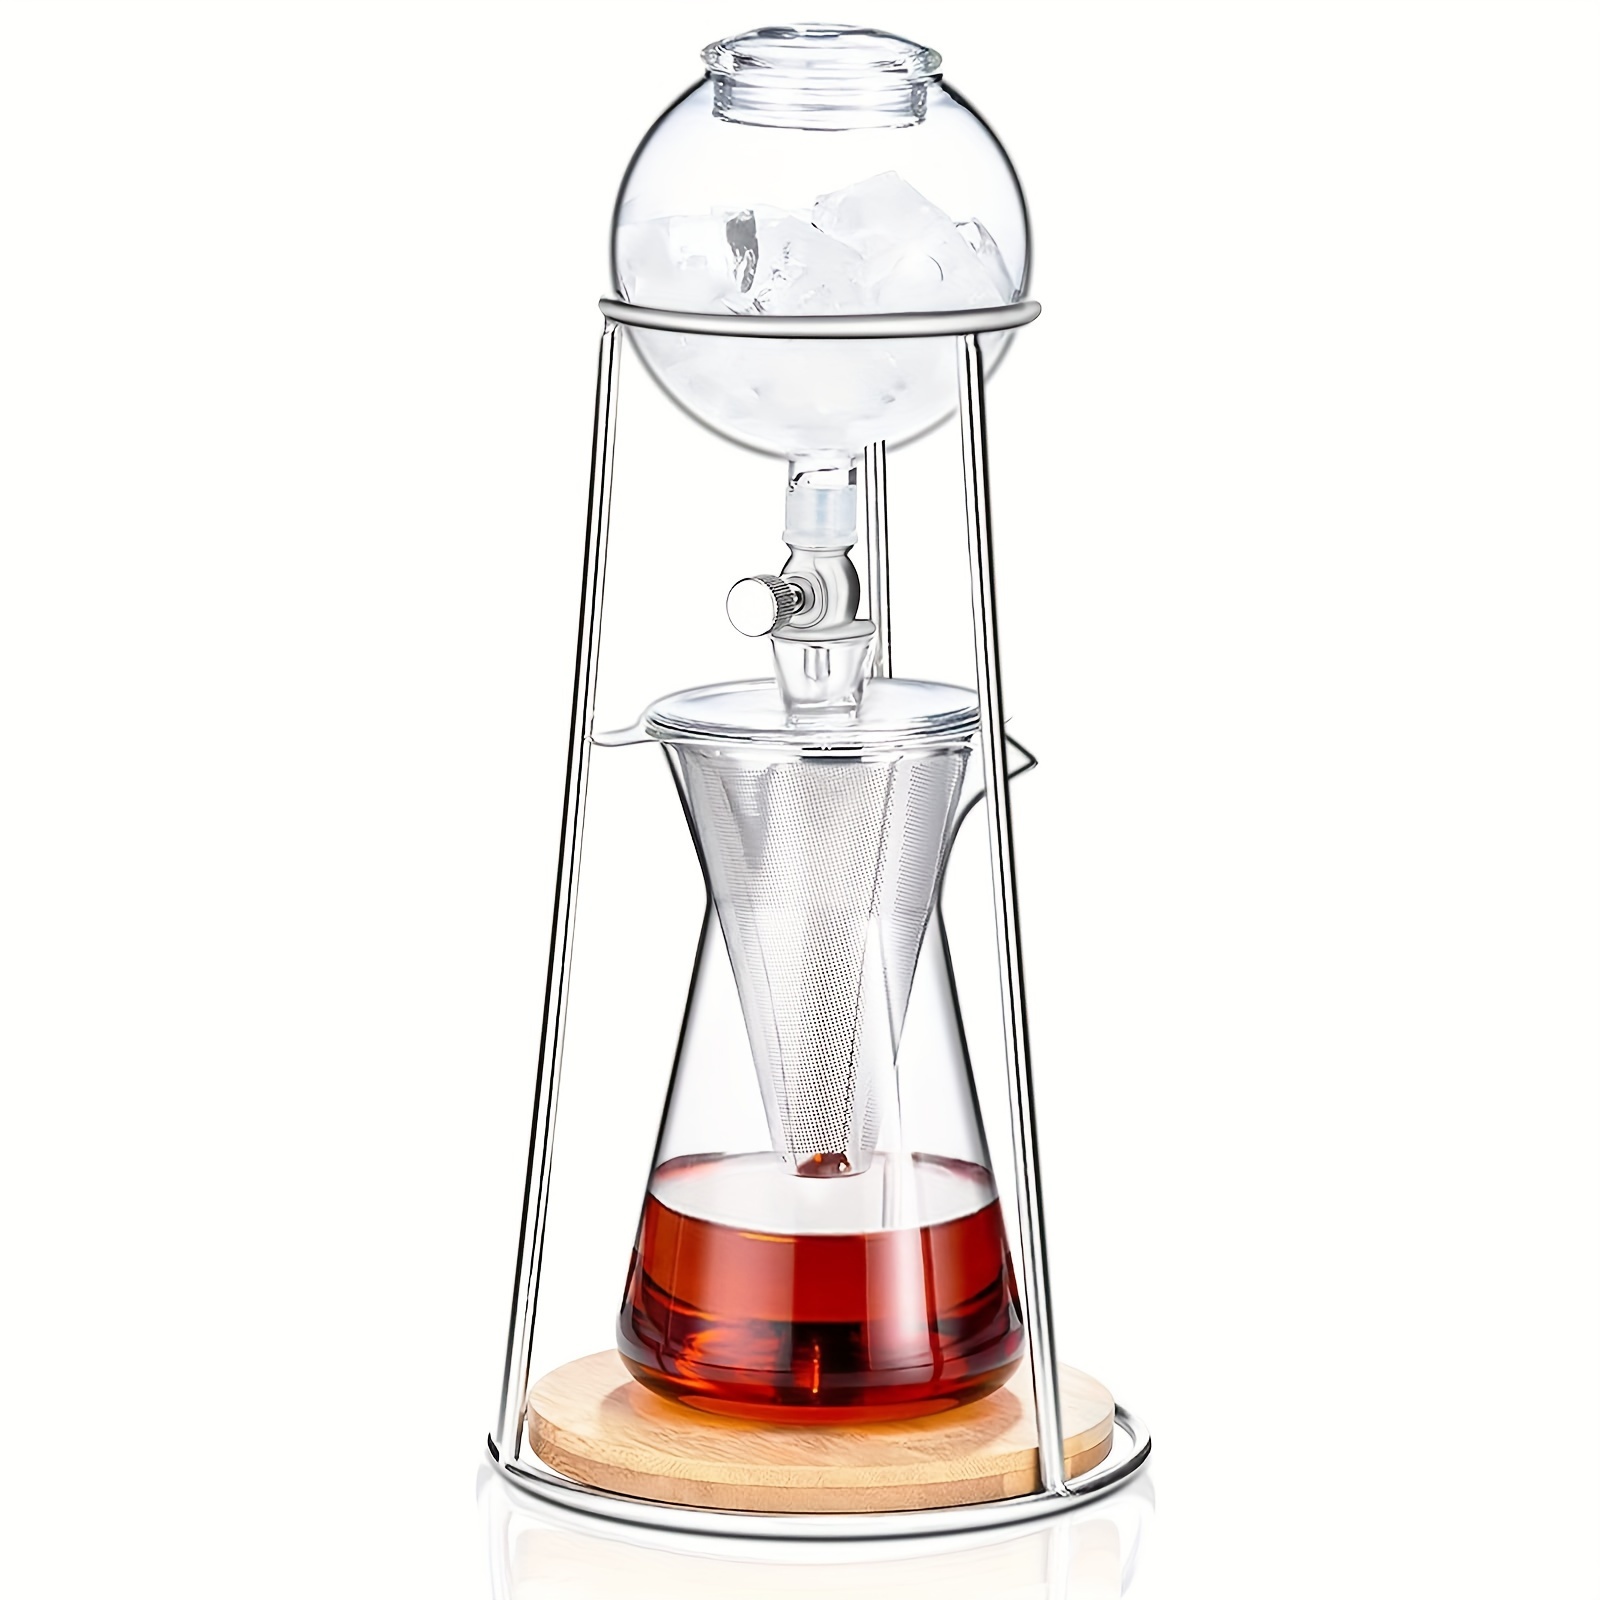 Cold Brew Coffee Maker, Iced Coffee Maker in Stainless Steel and  Borosilicate Glass, Cold Brew Drip Coffee Maker with Slow Drip Technology,  Iced Tea Maker 2-4 Cup( Cups Not Included)